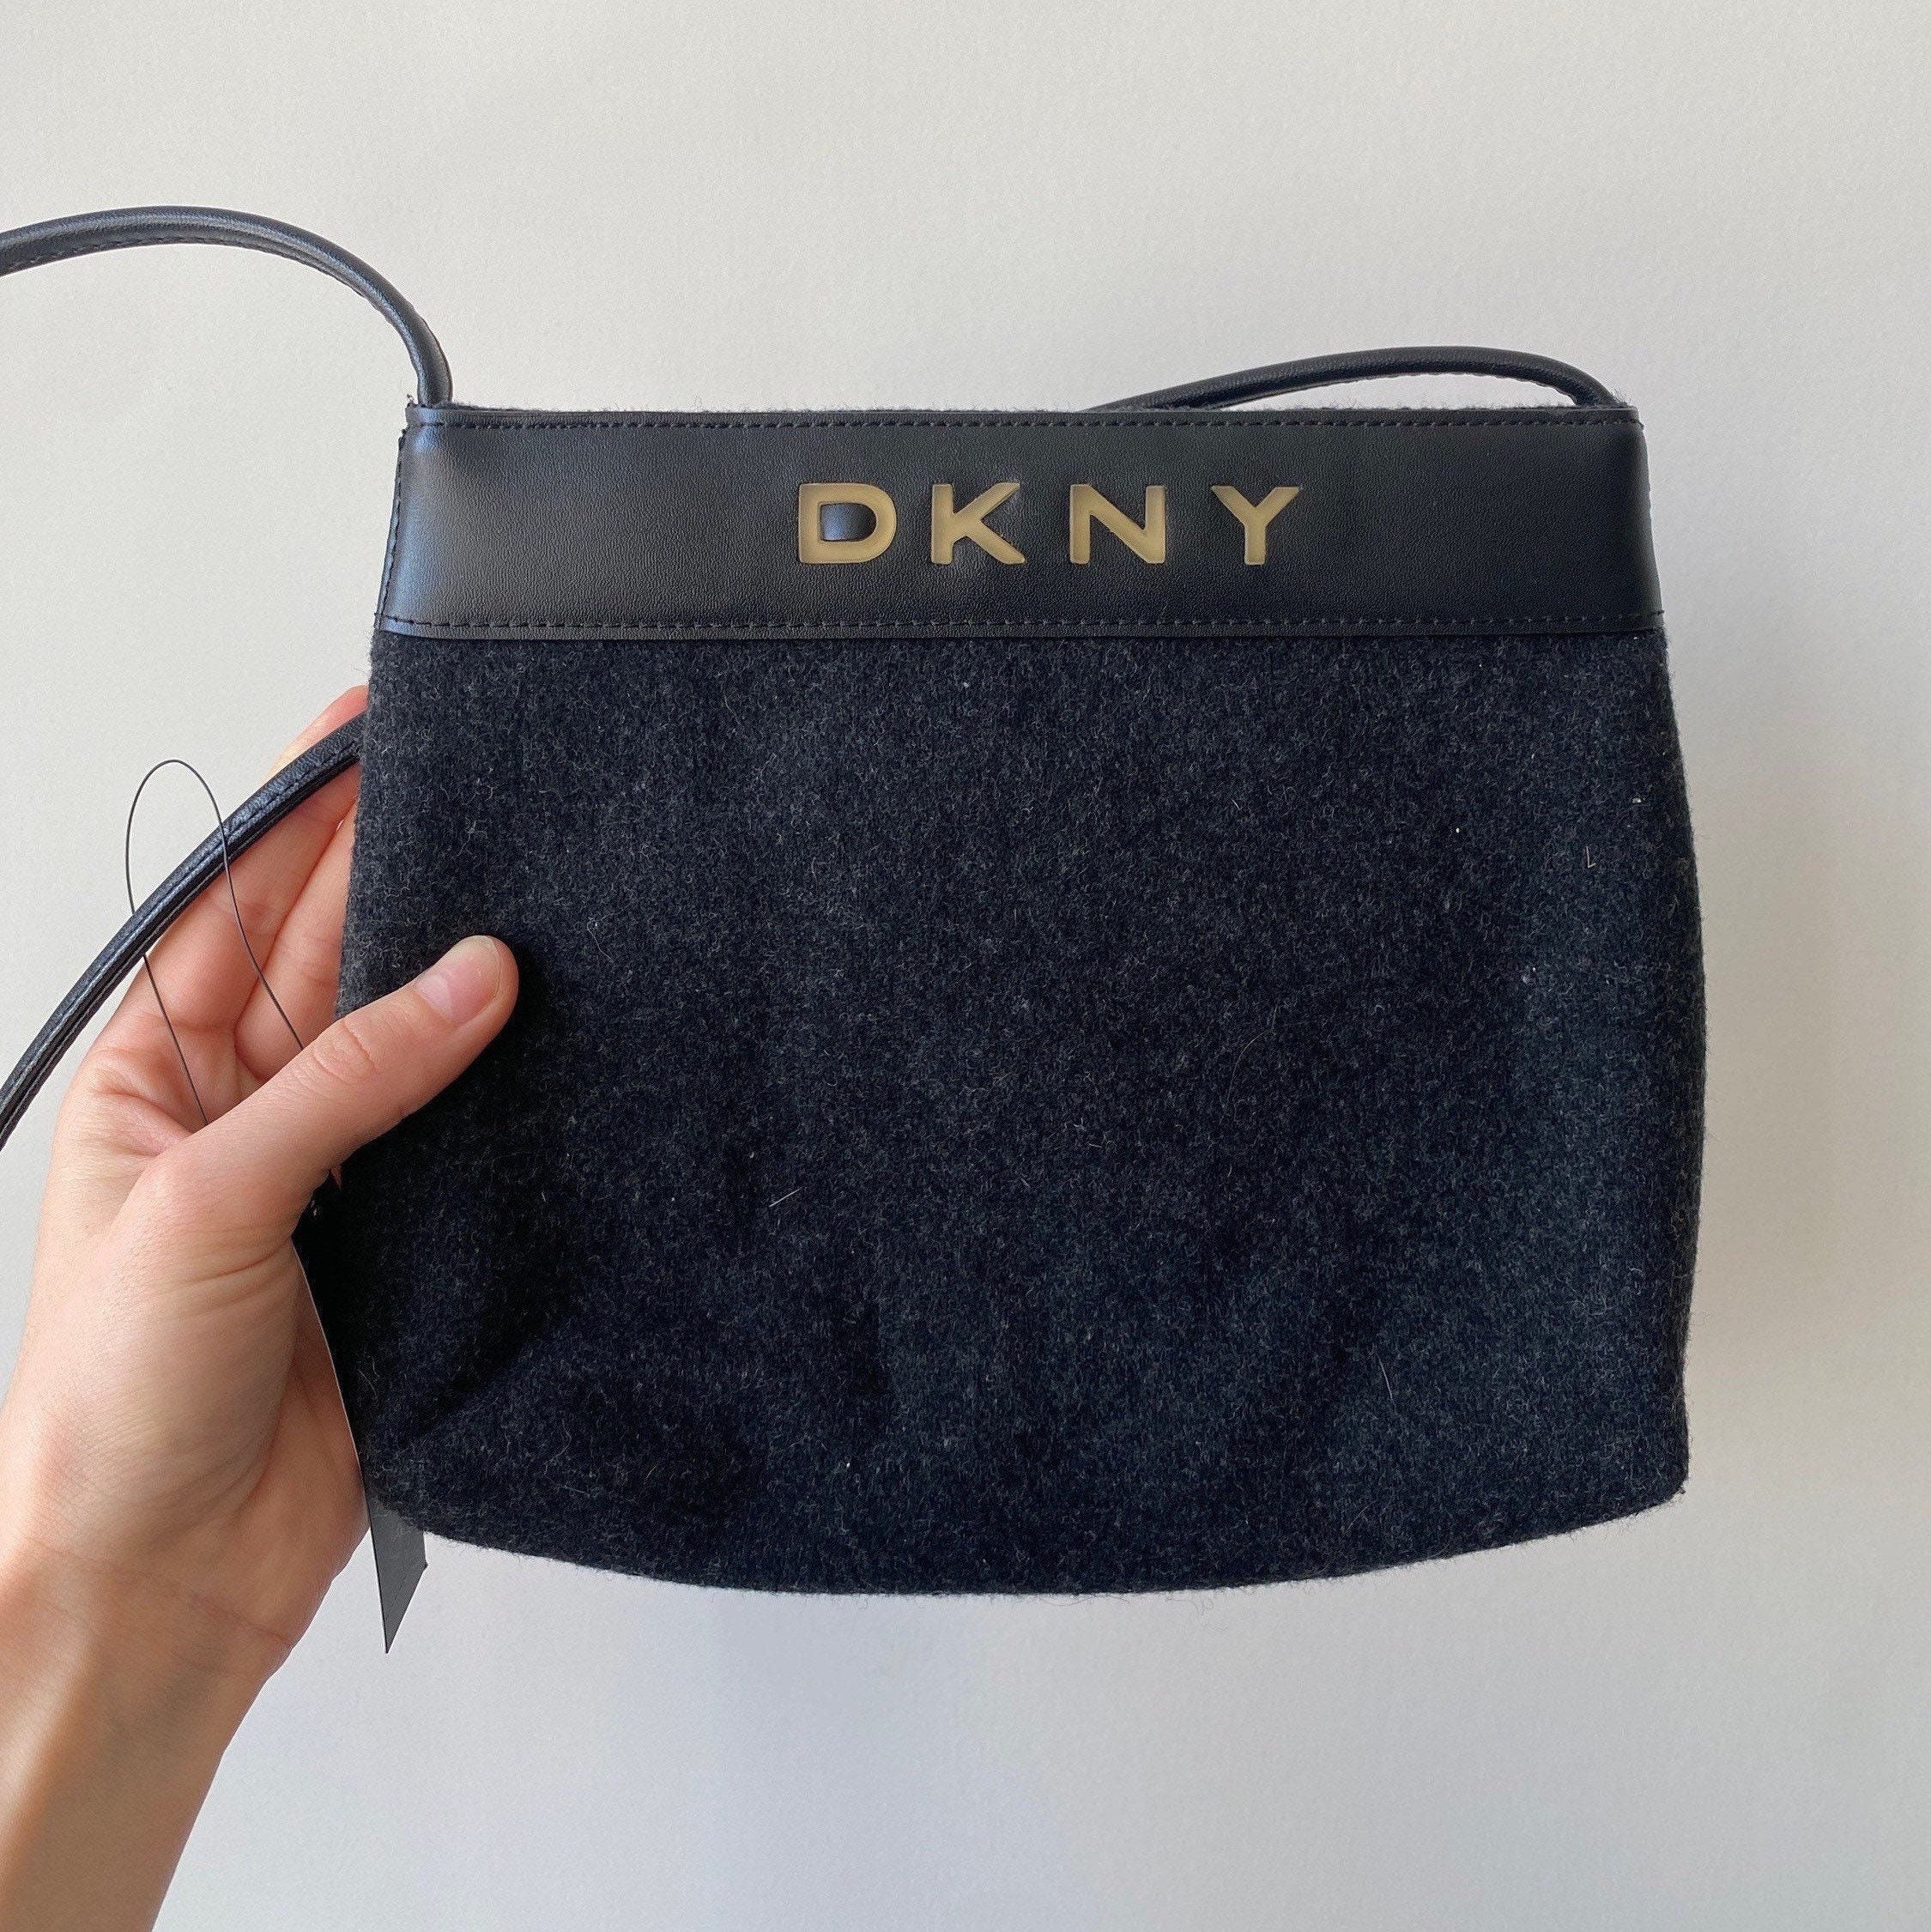 DKNY Brayden NWT $178 Large Reversible Tote w/ Clutch Coin Purse Travel  Shopper | eBay